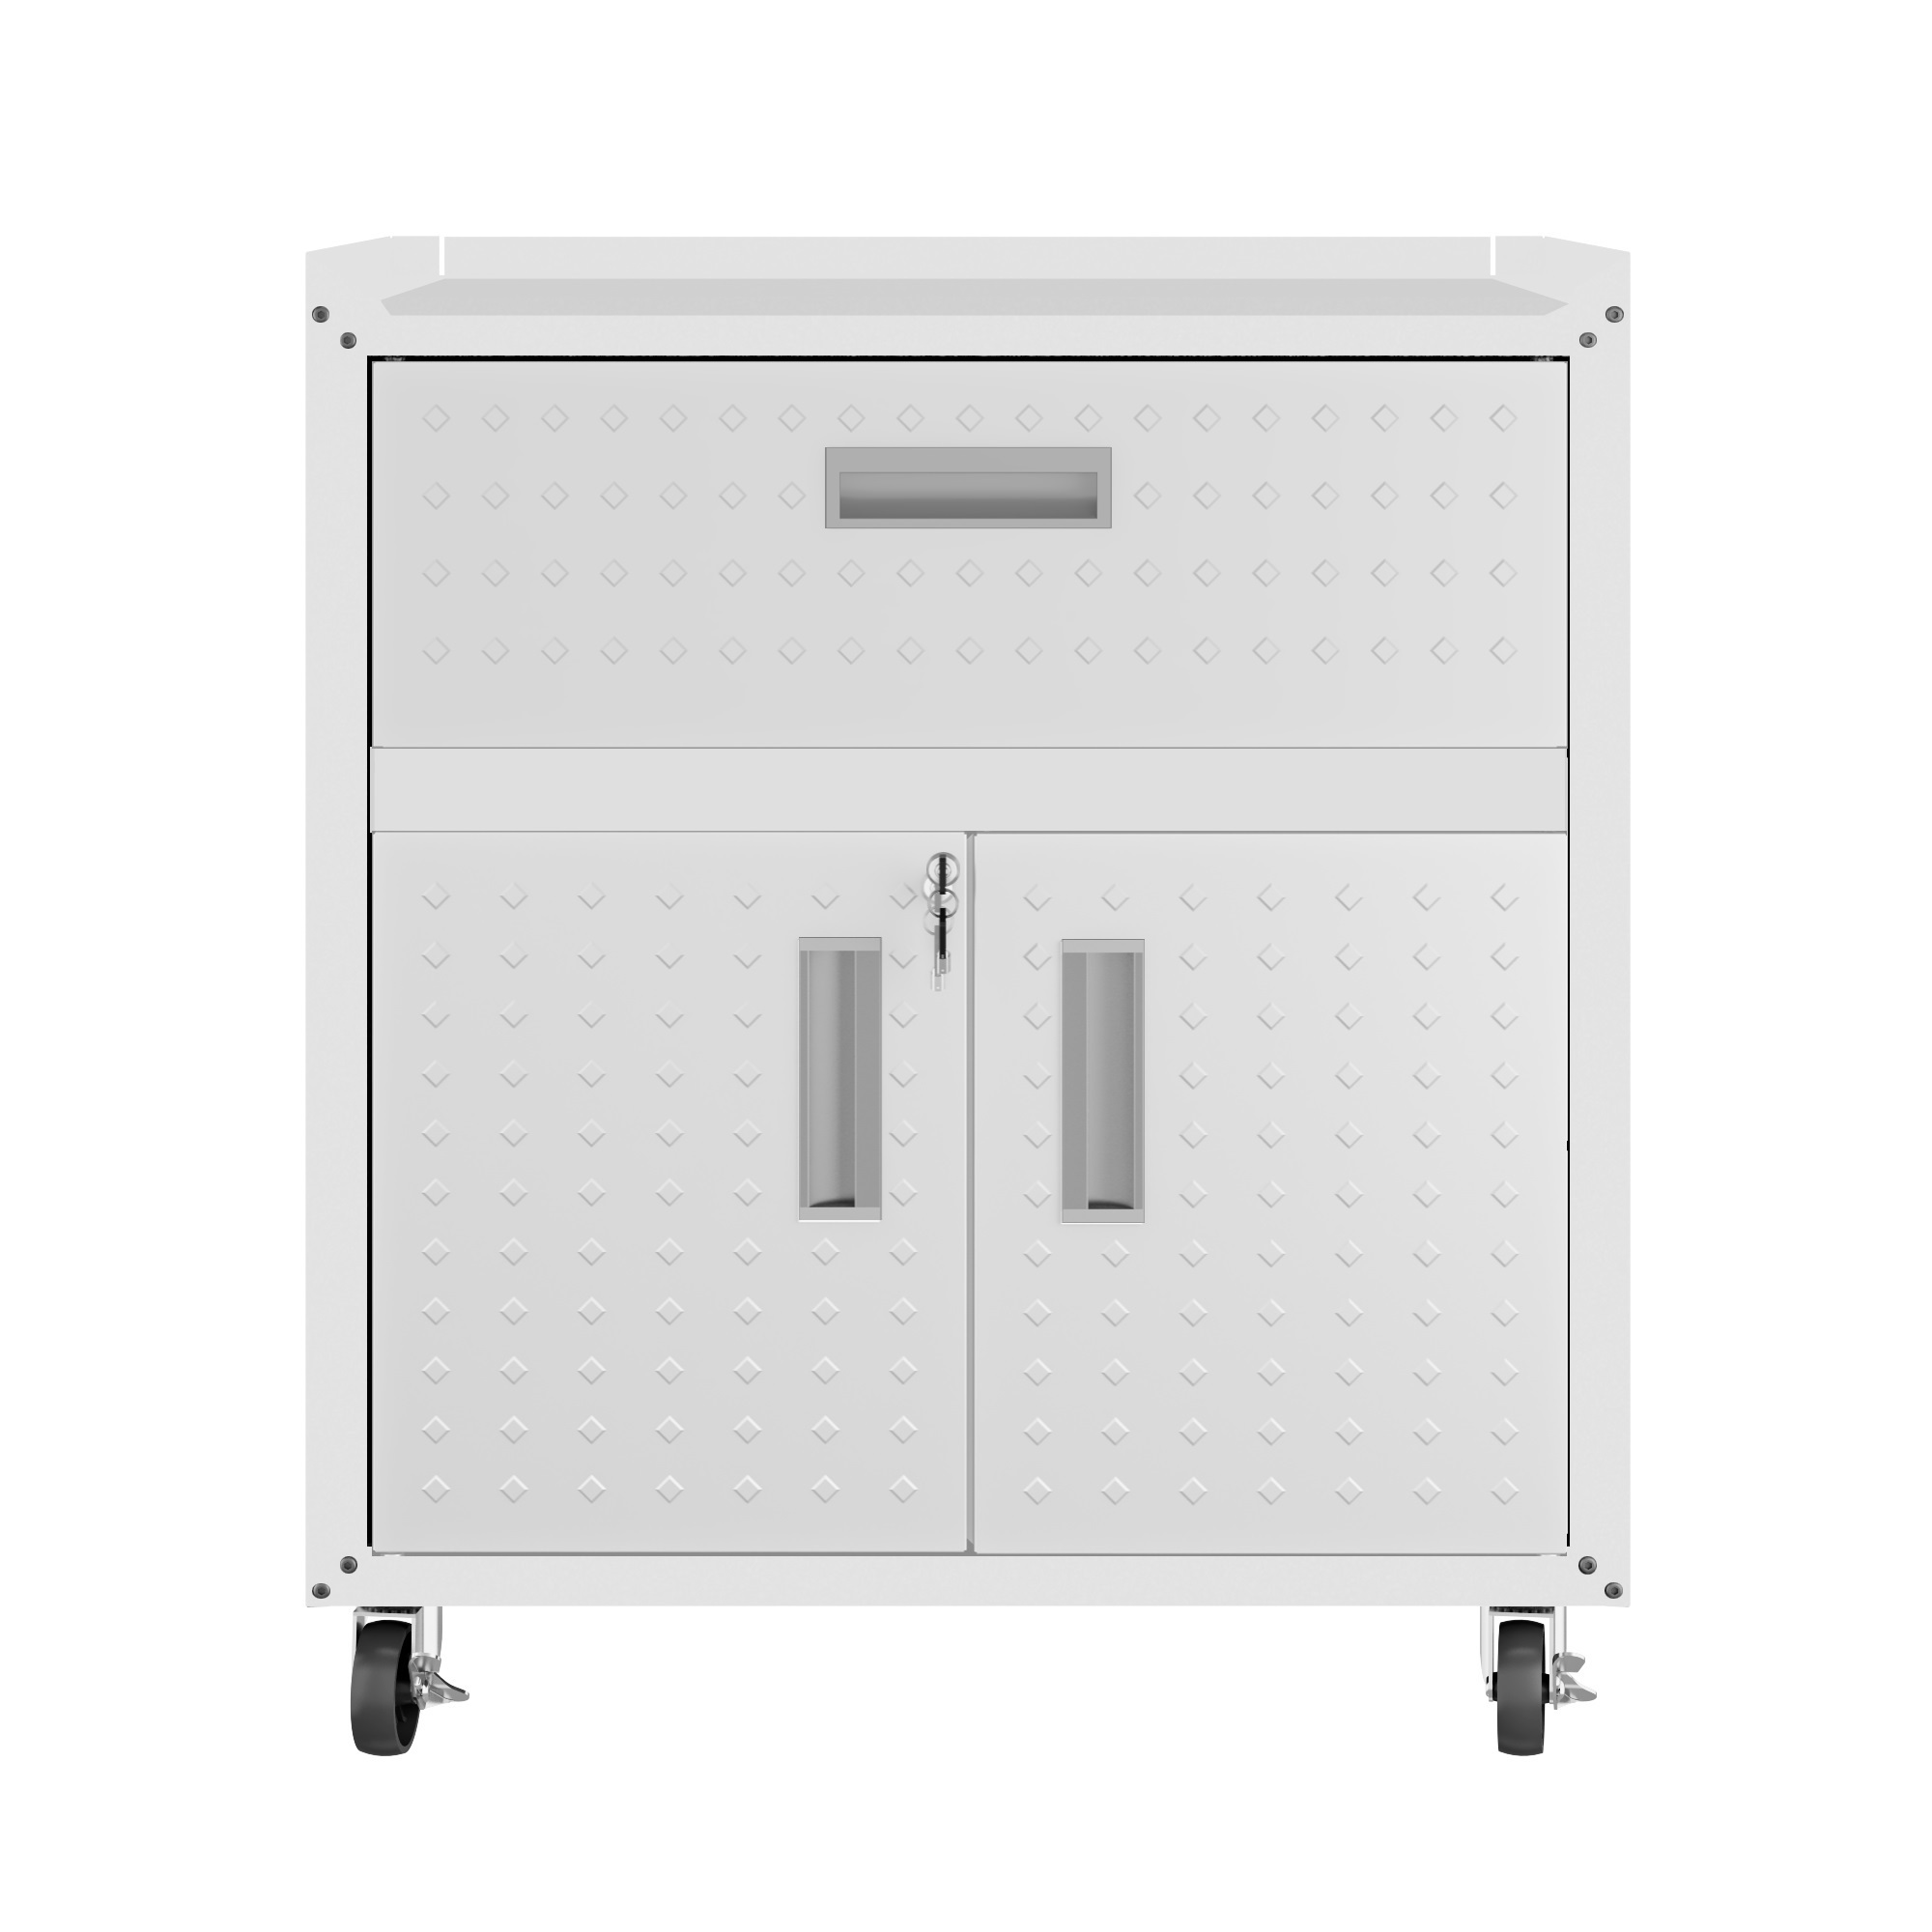 Manhattan Comfort, Fortress Mobile Garage Cabinet in White, Height 31.5 in, Width 30.3 in, Color White, Model 2GMCC